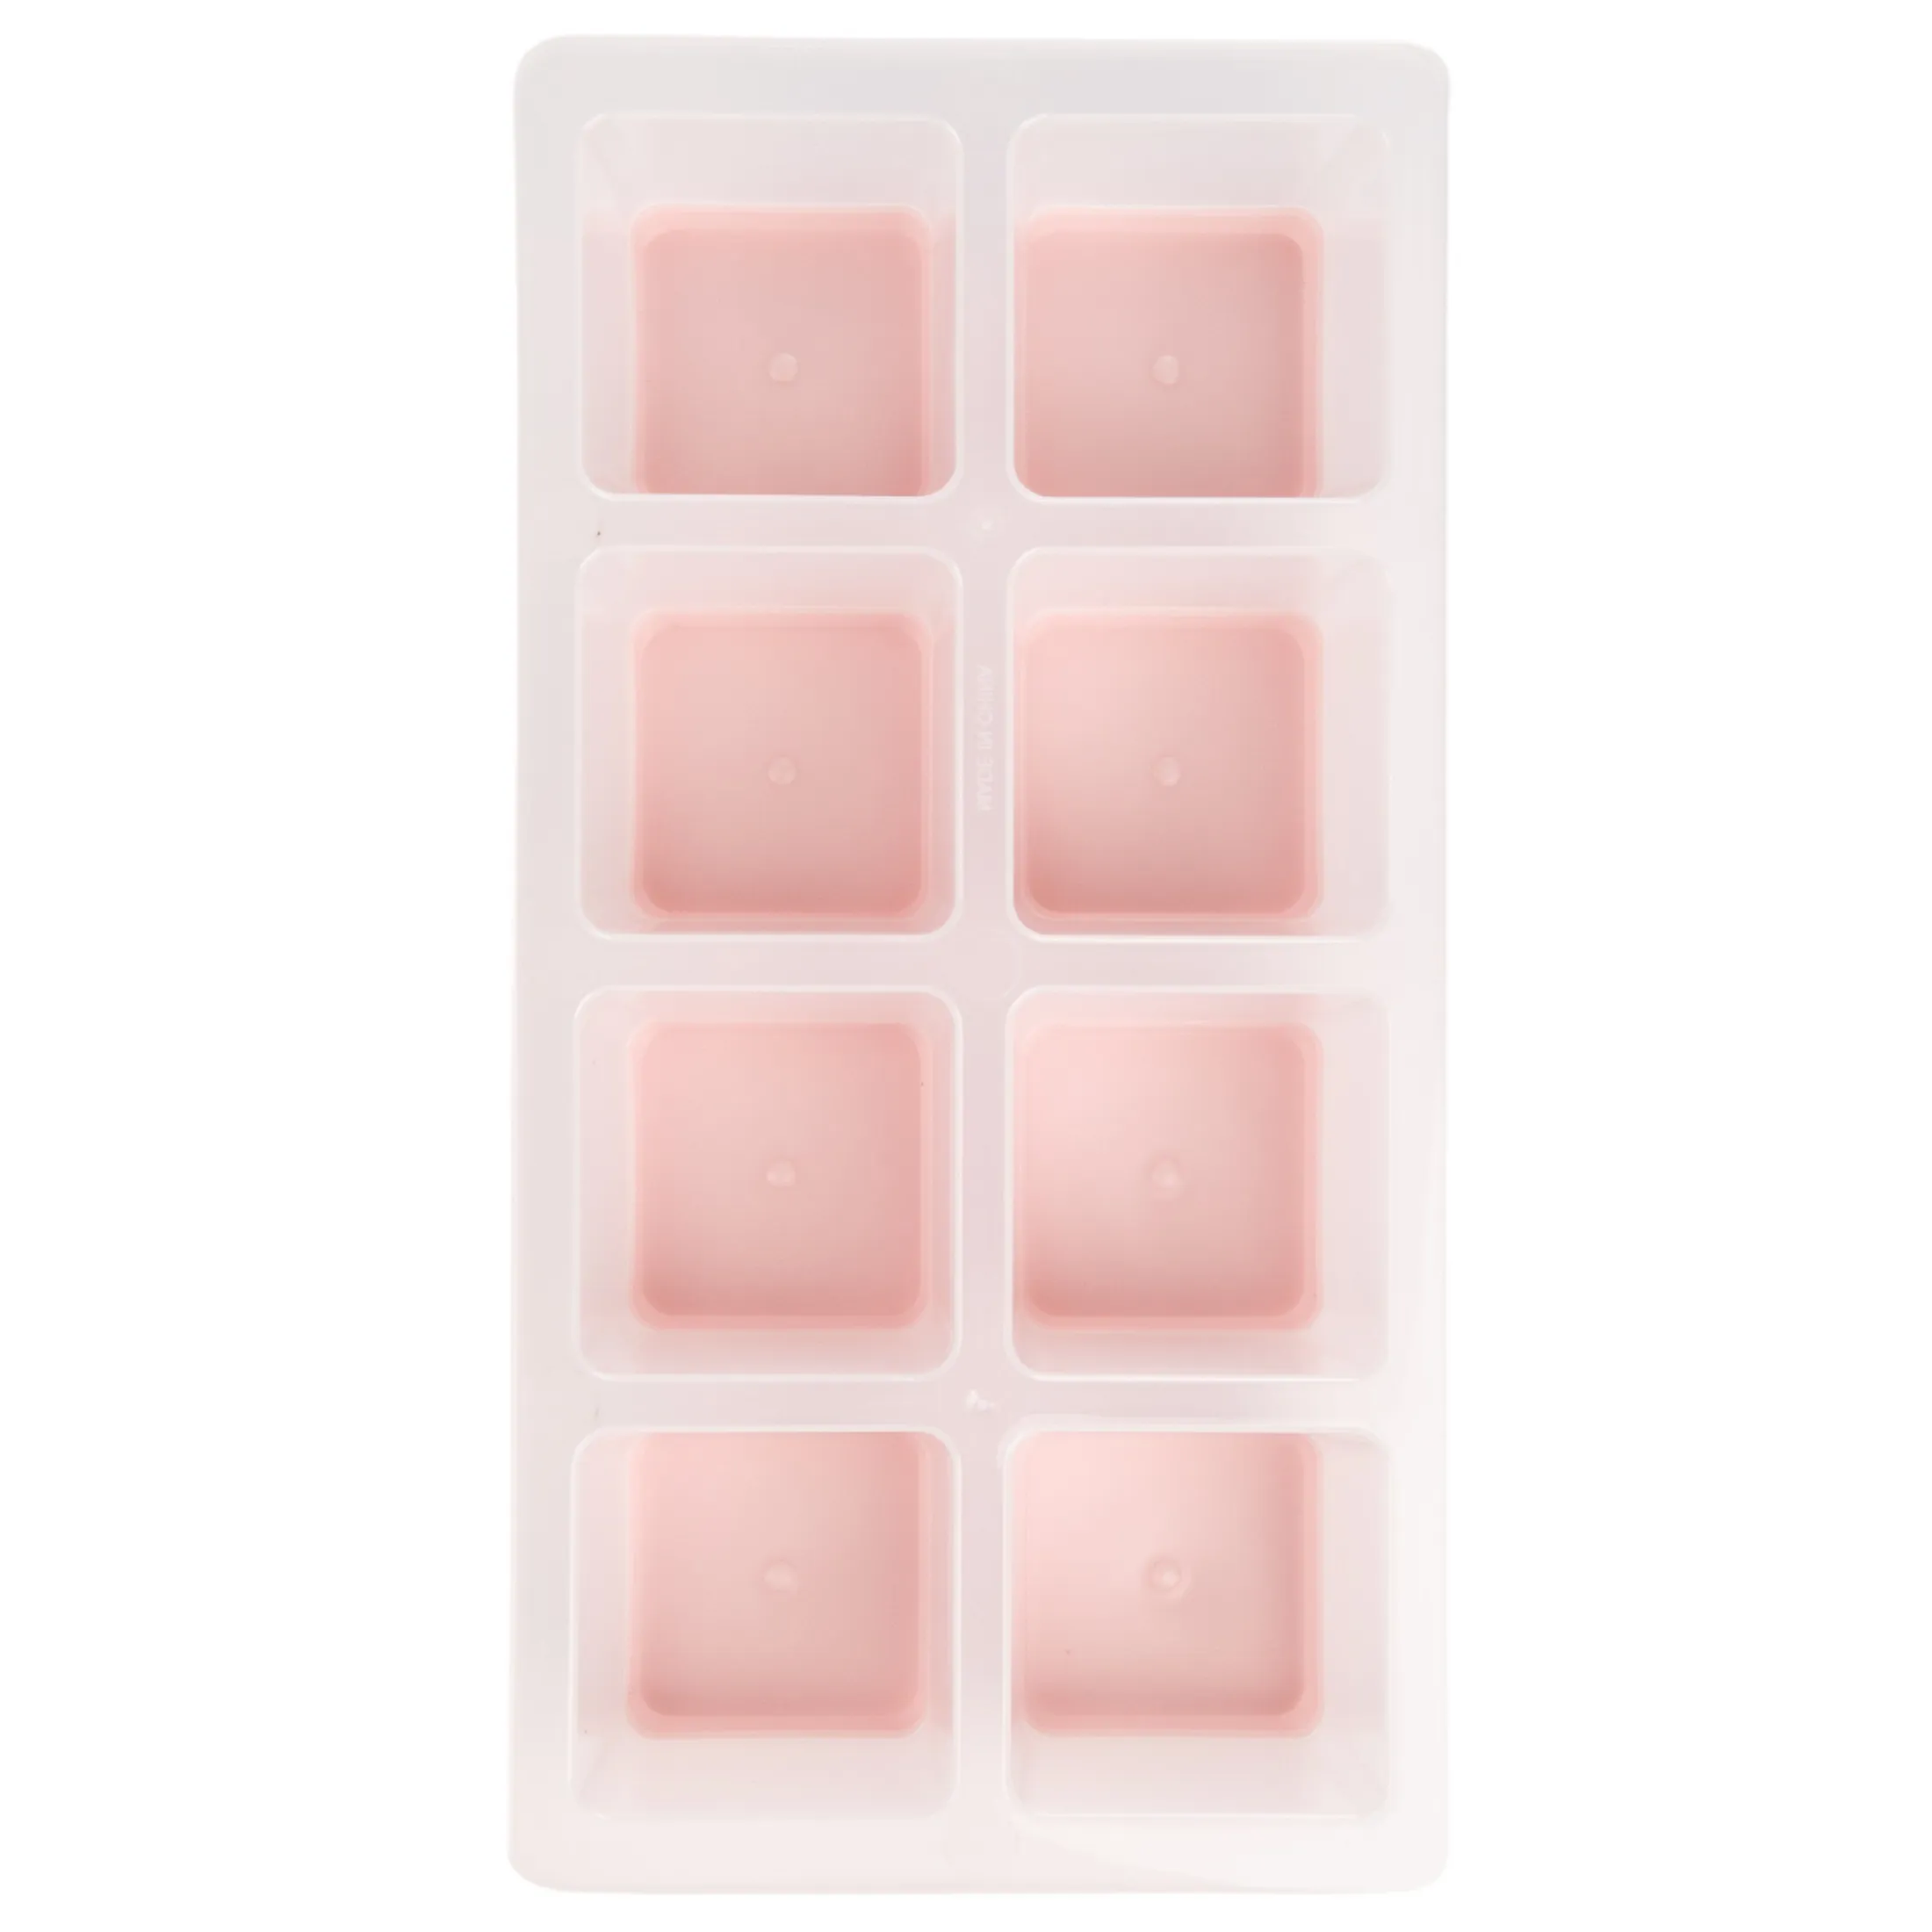 HD Designs Outdoors™ Silicone Ice Cube Tray - Deep Lake, 1 ct - Kroger